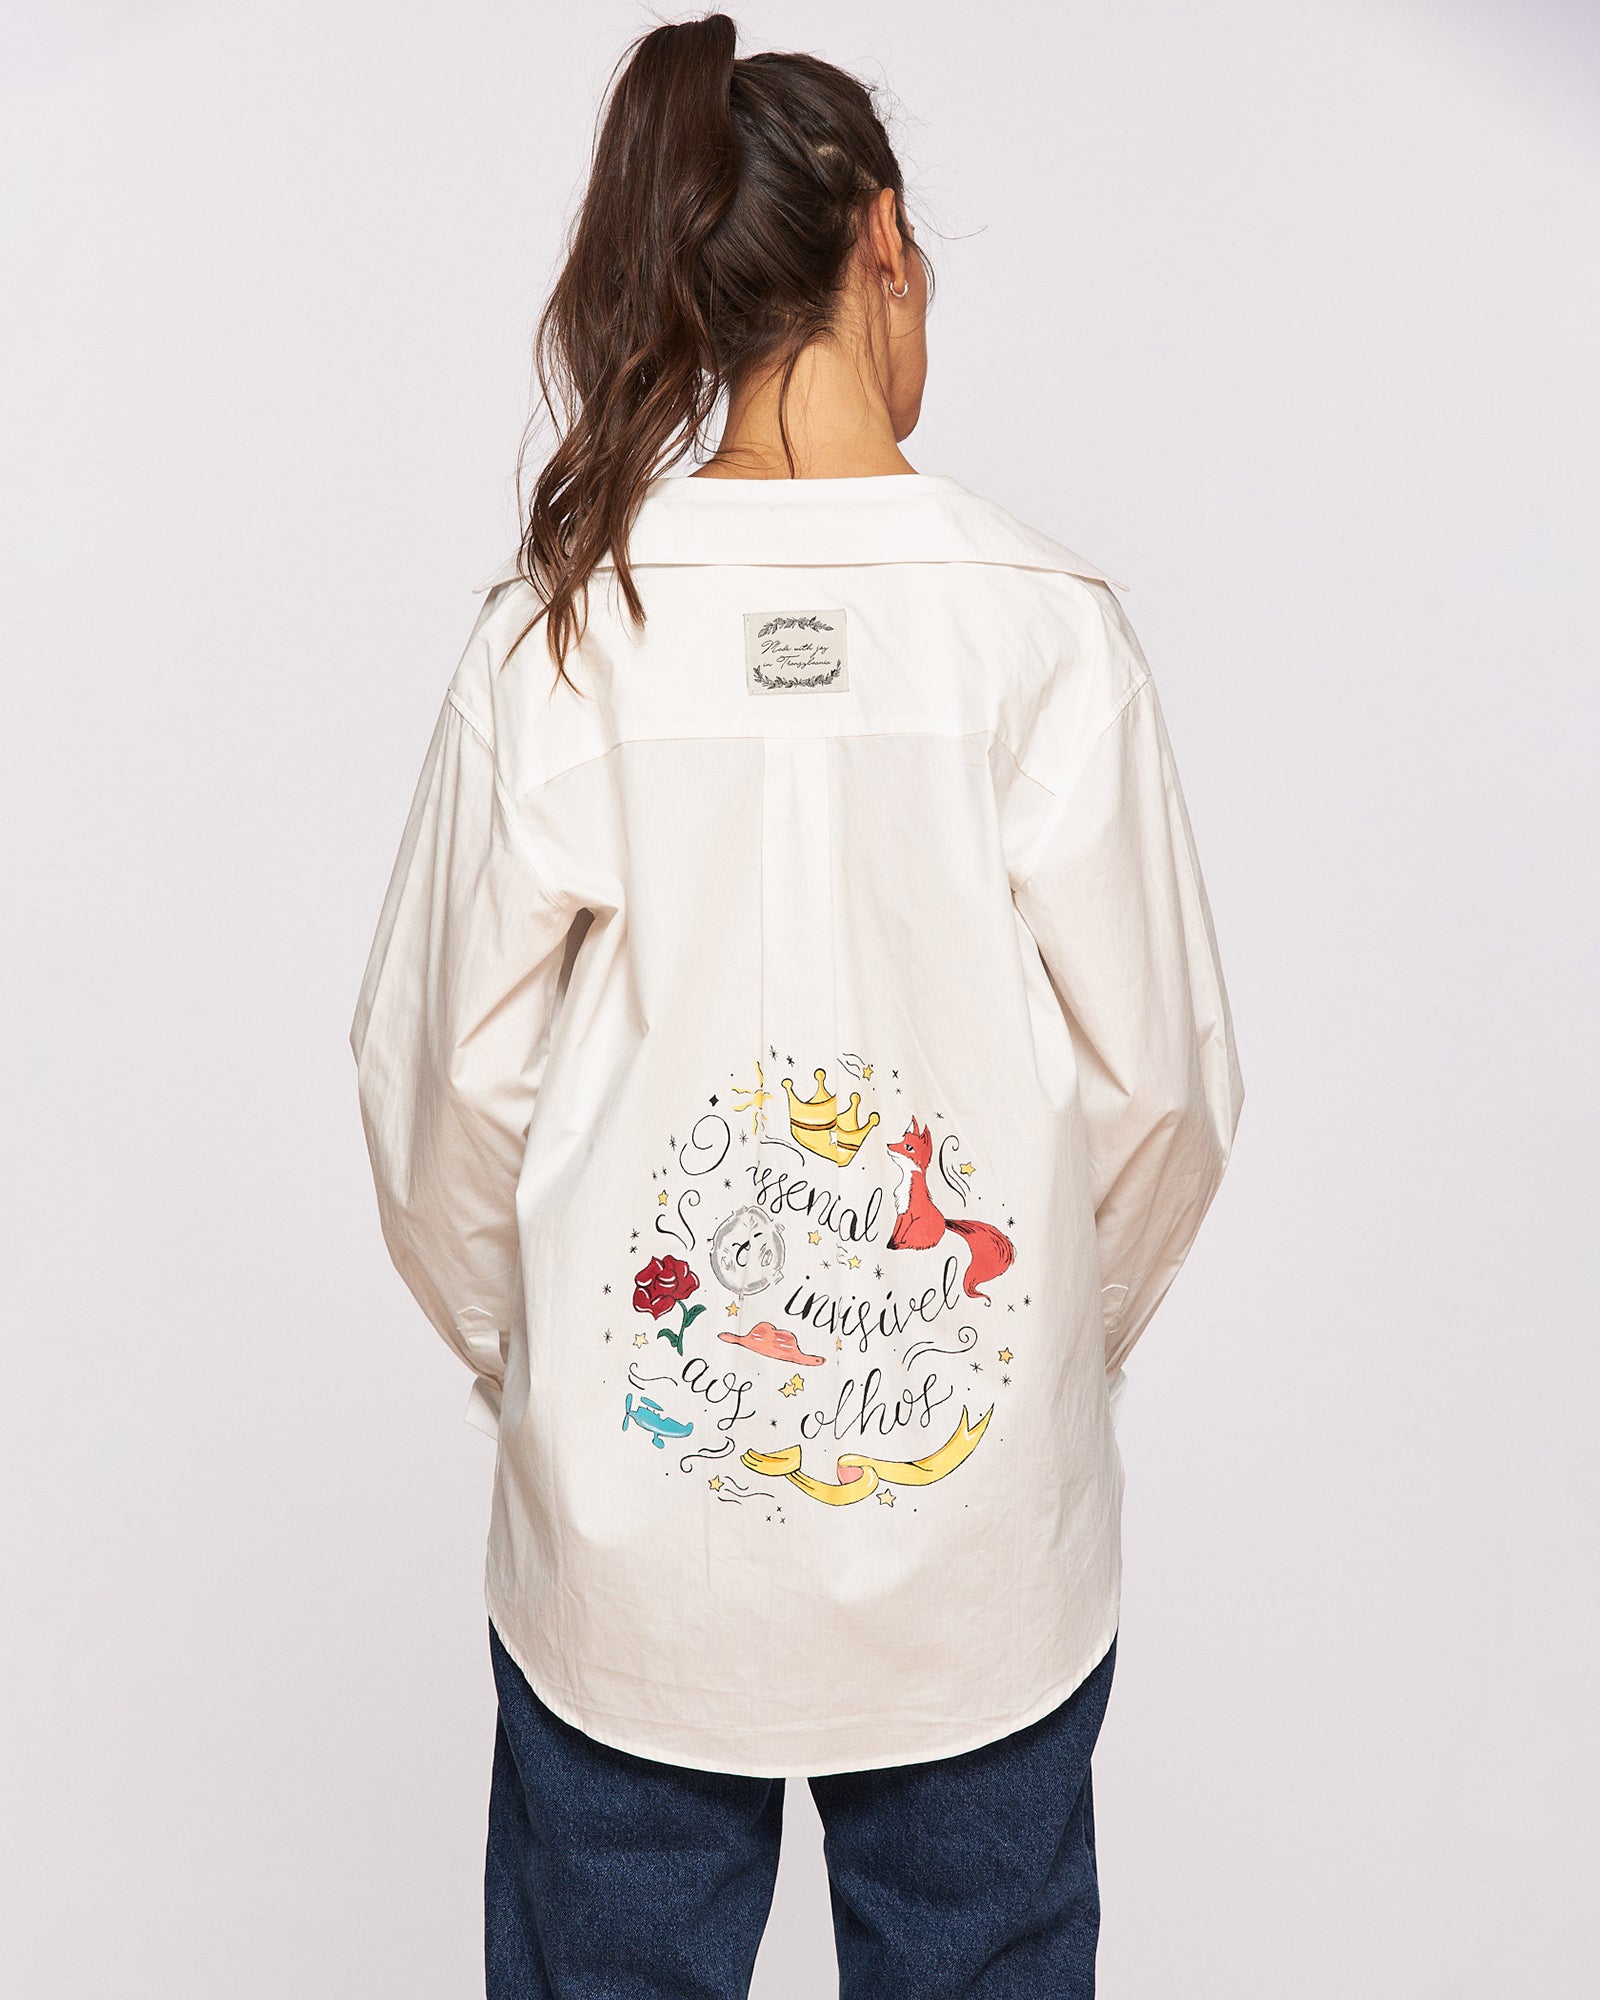 "The Little Prince" Hand Painted Women's Shirt